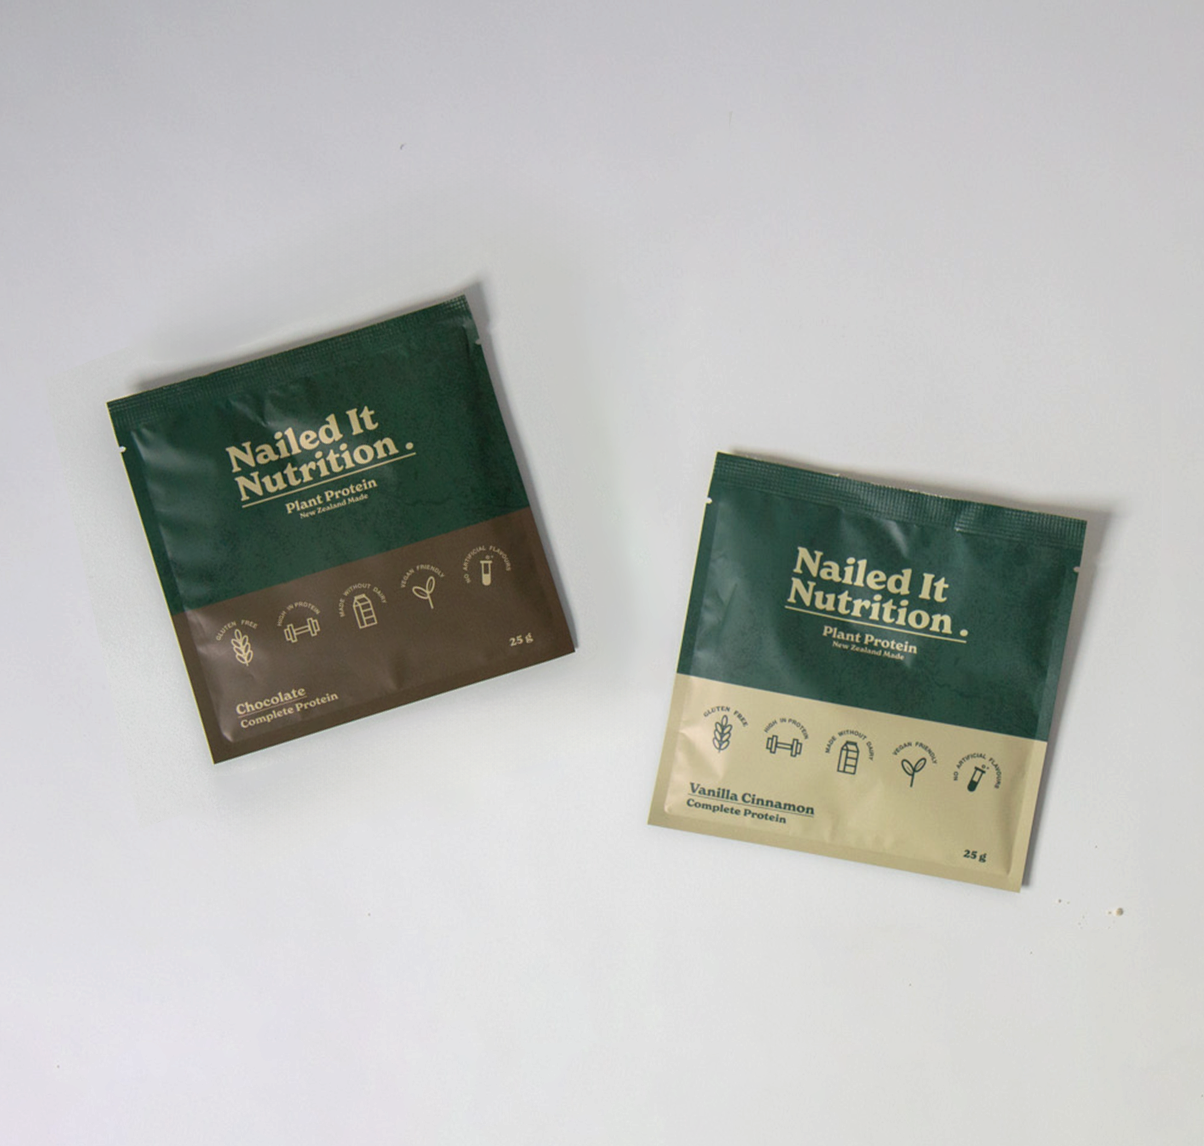 Shop Nailed It Nutrition one serving plant protein sample packs